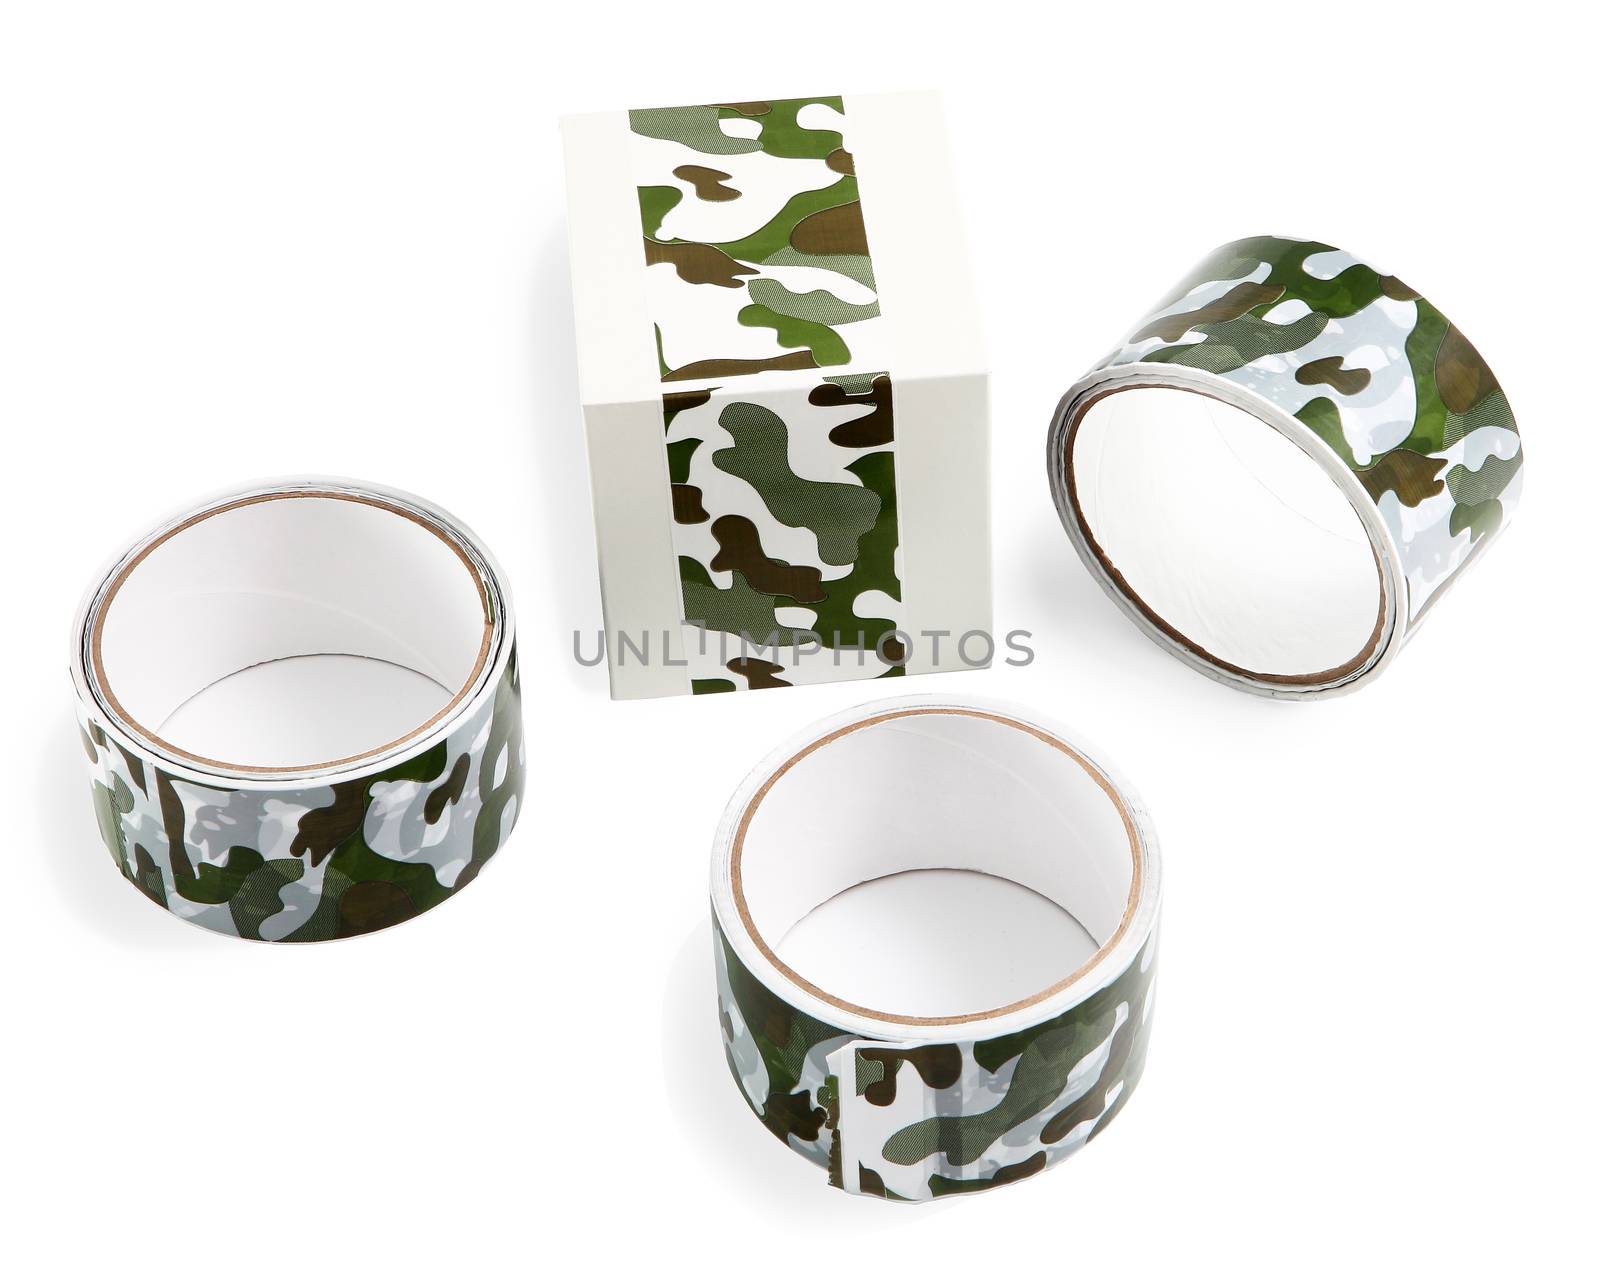 Three rolls of duct tape with print green camouflage and a box wrapped with ribbon for packing purchases and gifts. Flexible packaging materials and products.